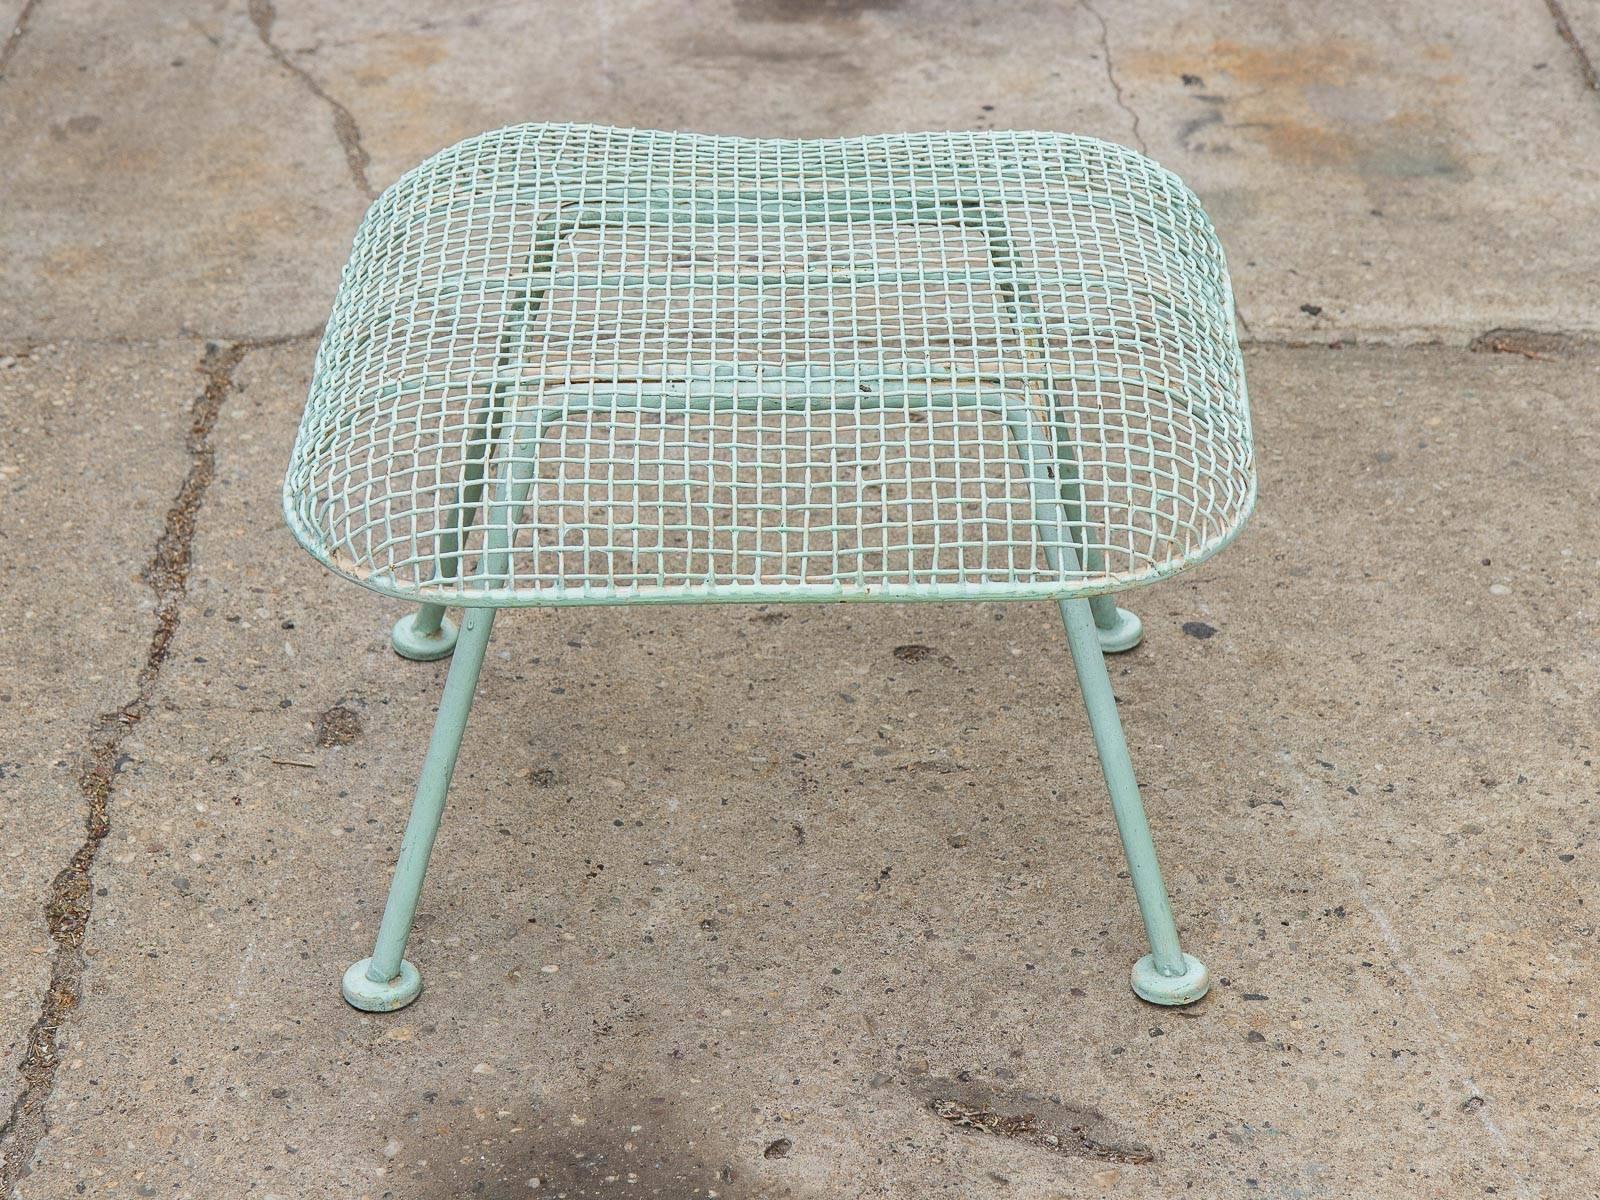 Scarce, Russell Woodard Sculptura wrought iron outdoor ottoman. This example is from the 1960s, and is in great vintage condition with some age-appropriate wear and chipping to the paint. The iron mesh has been painted a light, mint-teal giving it a